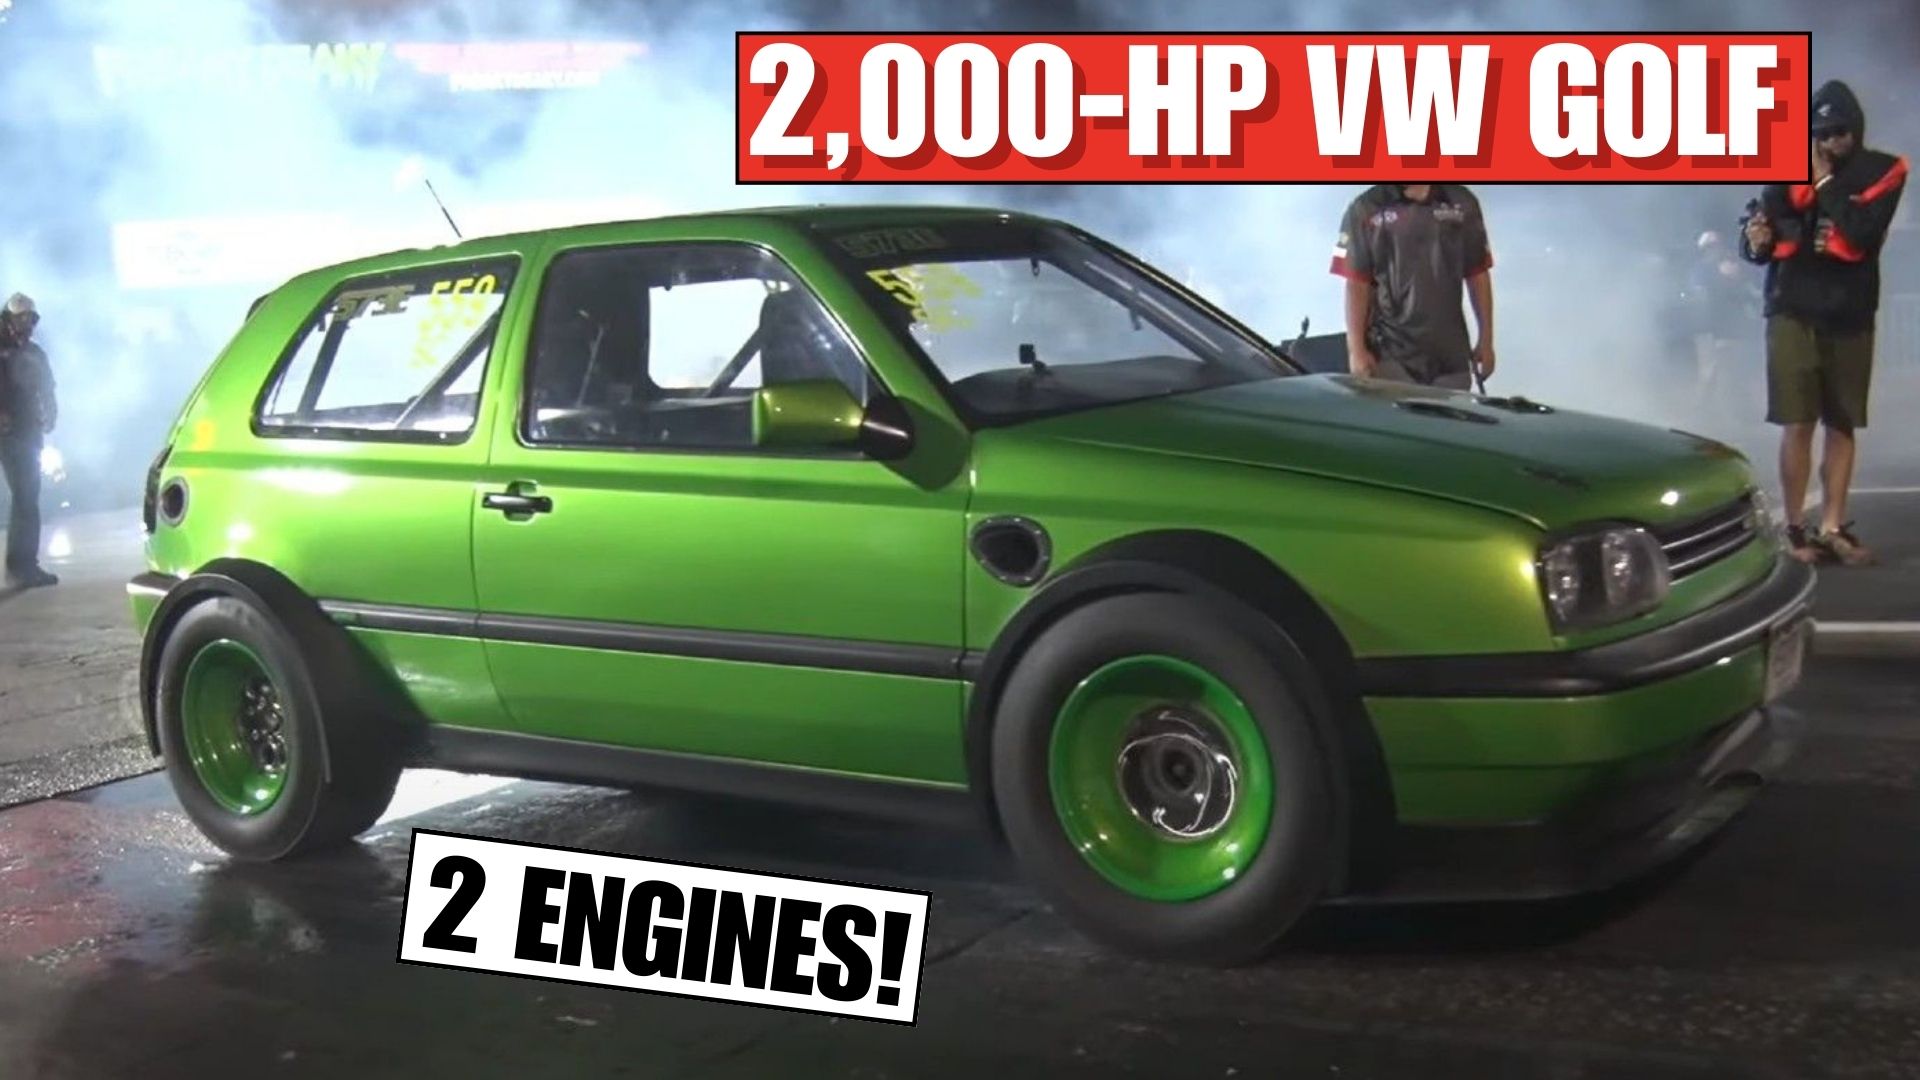 The Story Behind The Crazy Twin Engine MK3 Volkswagen Golf With 2,000 HP